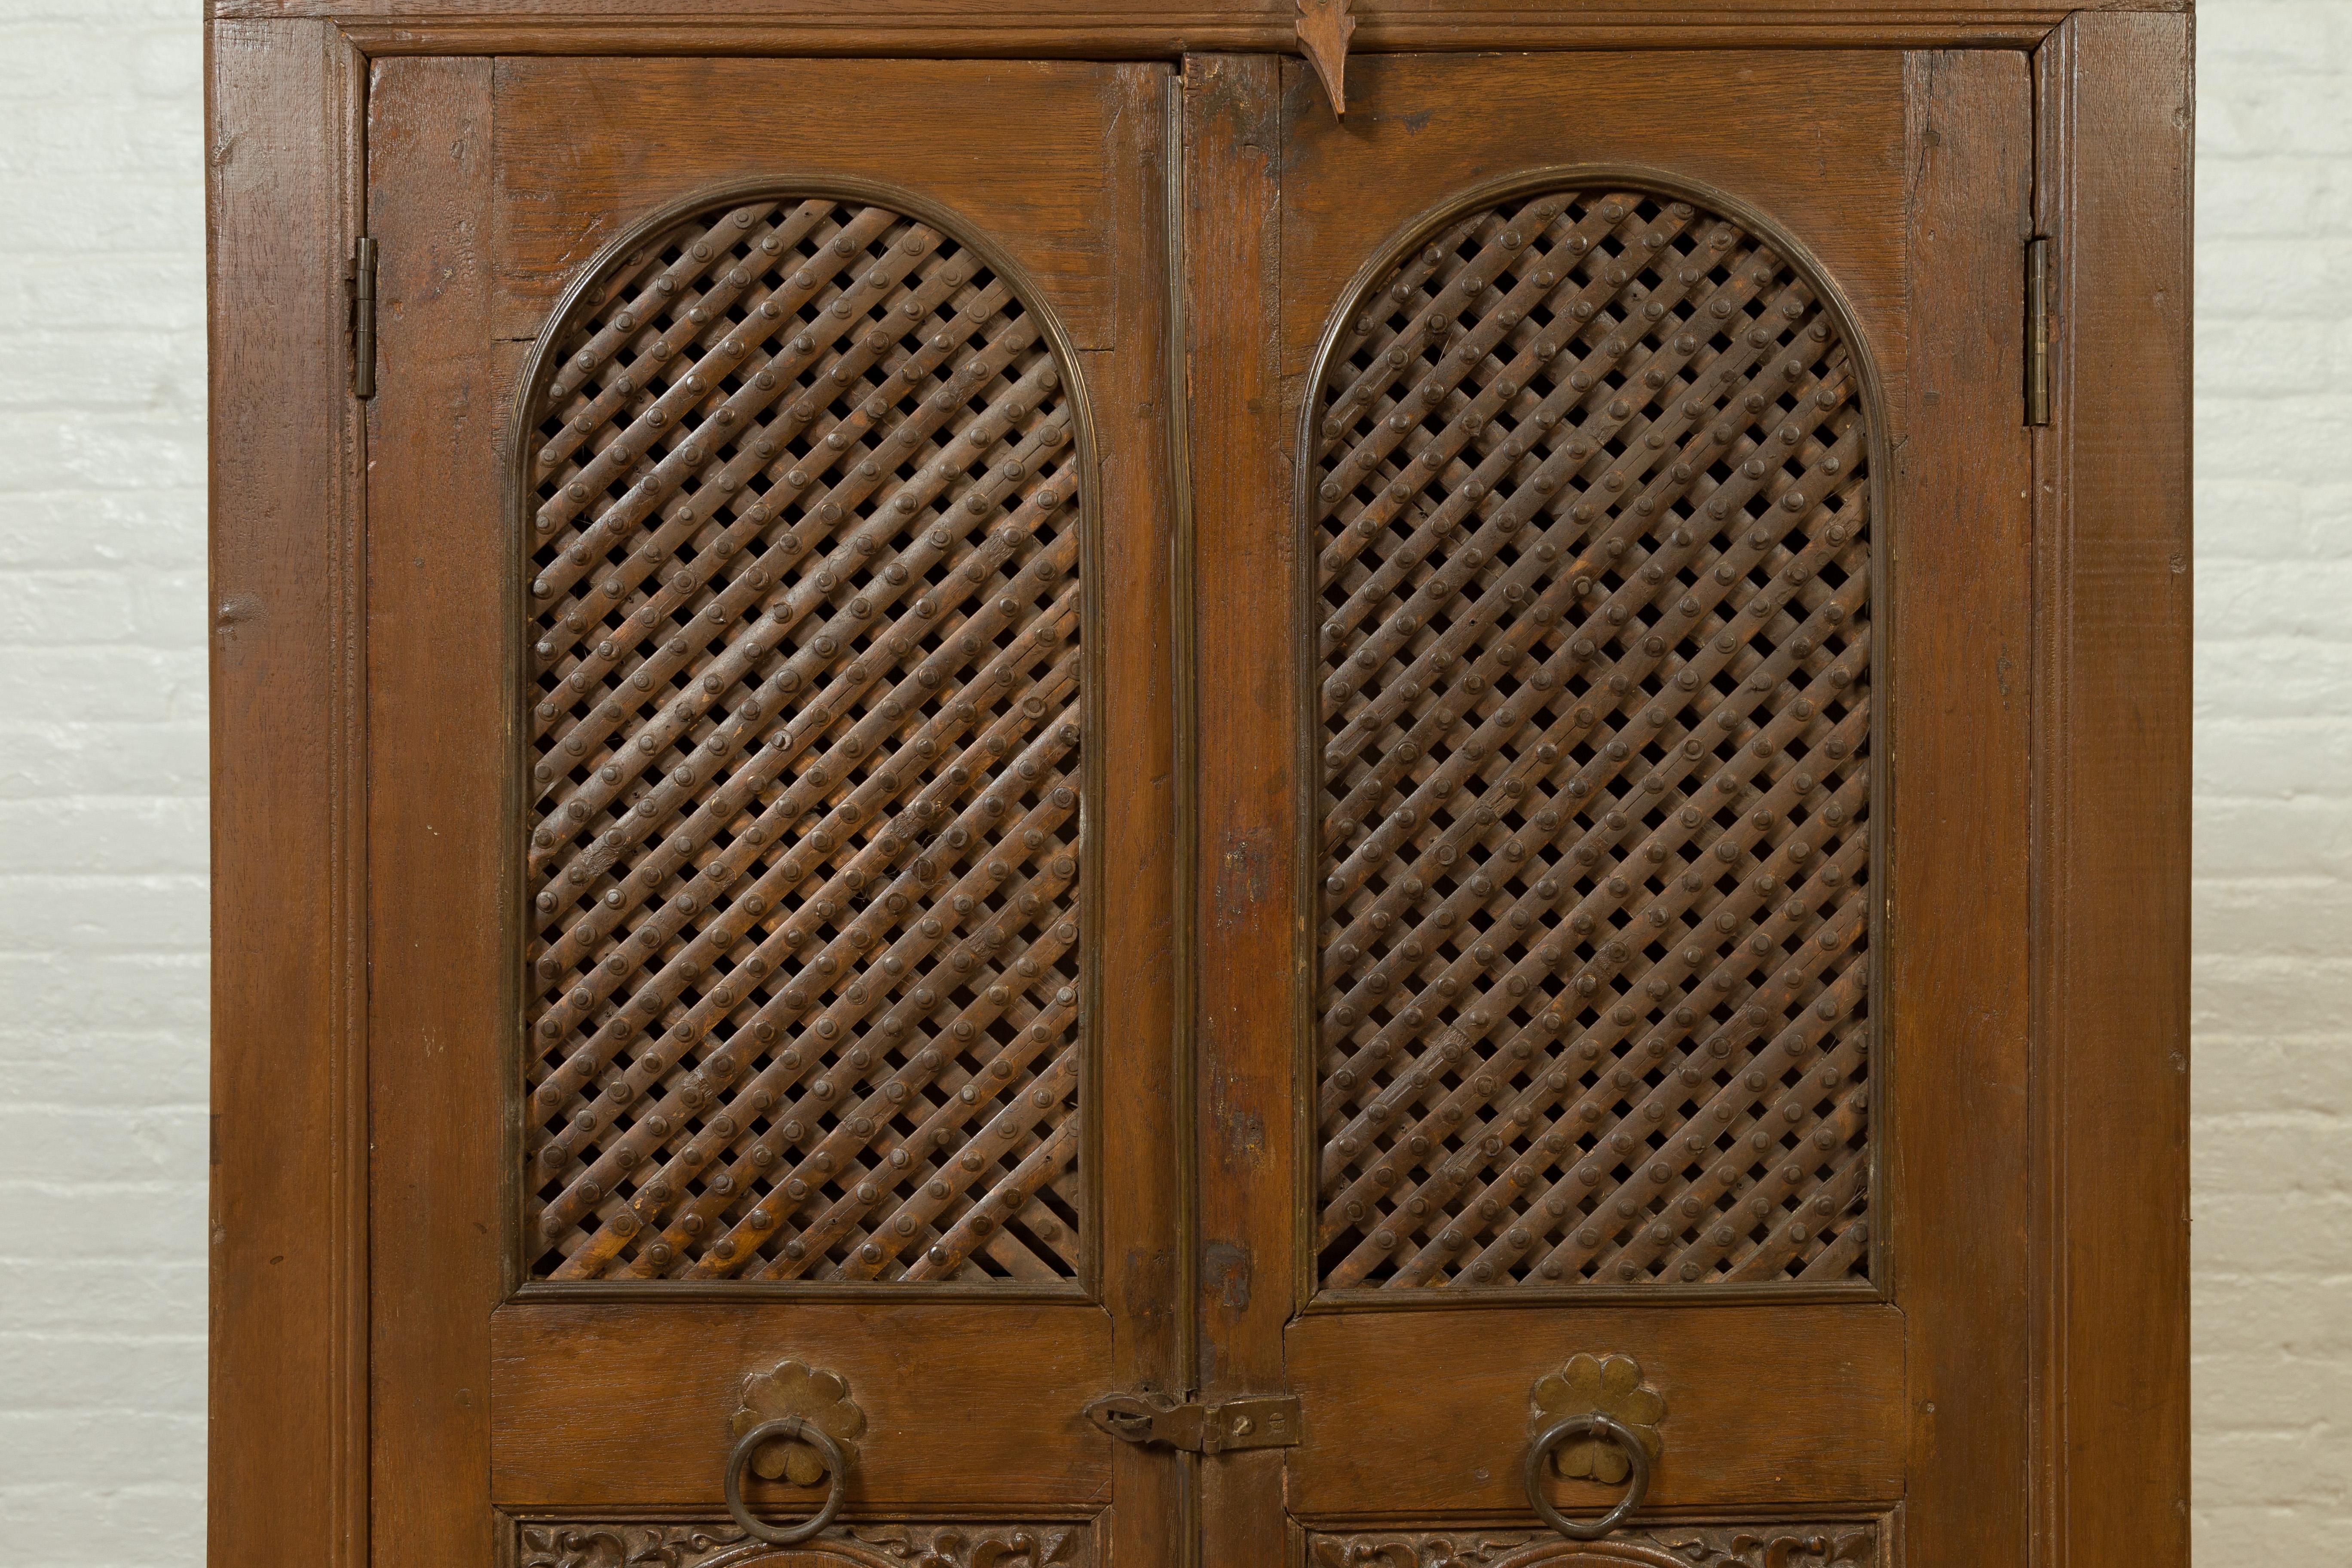 Wood Indian 19th Century Cabinet with Metal Fretwork Motifs and Oval Medallions For Sale